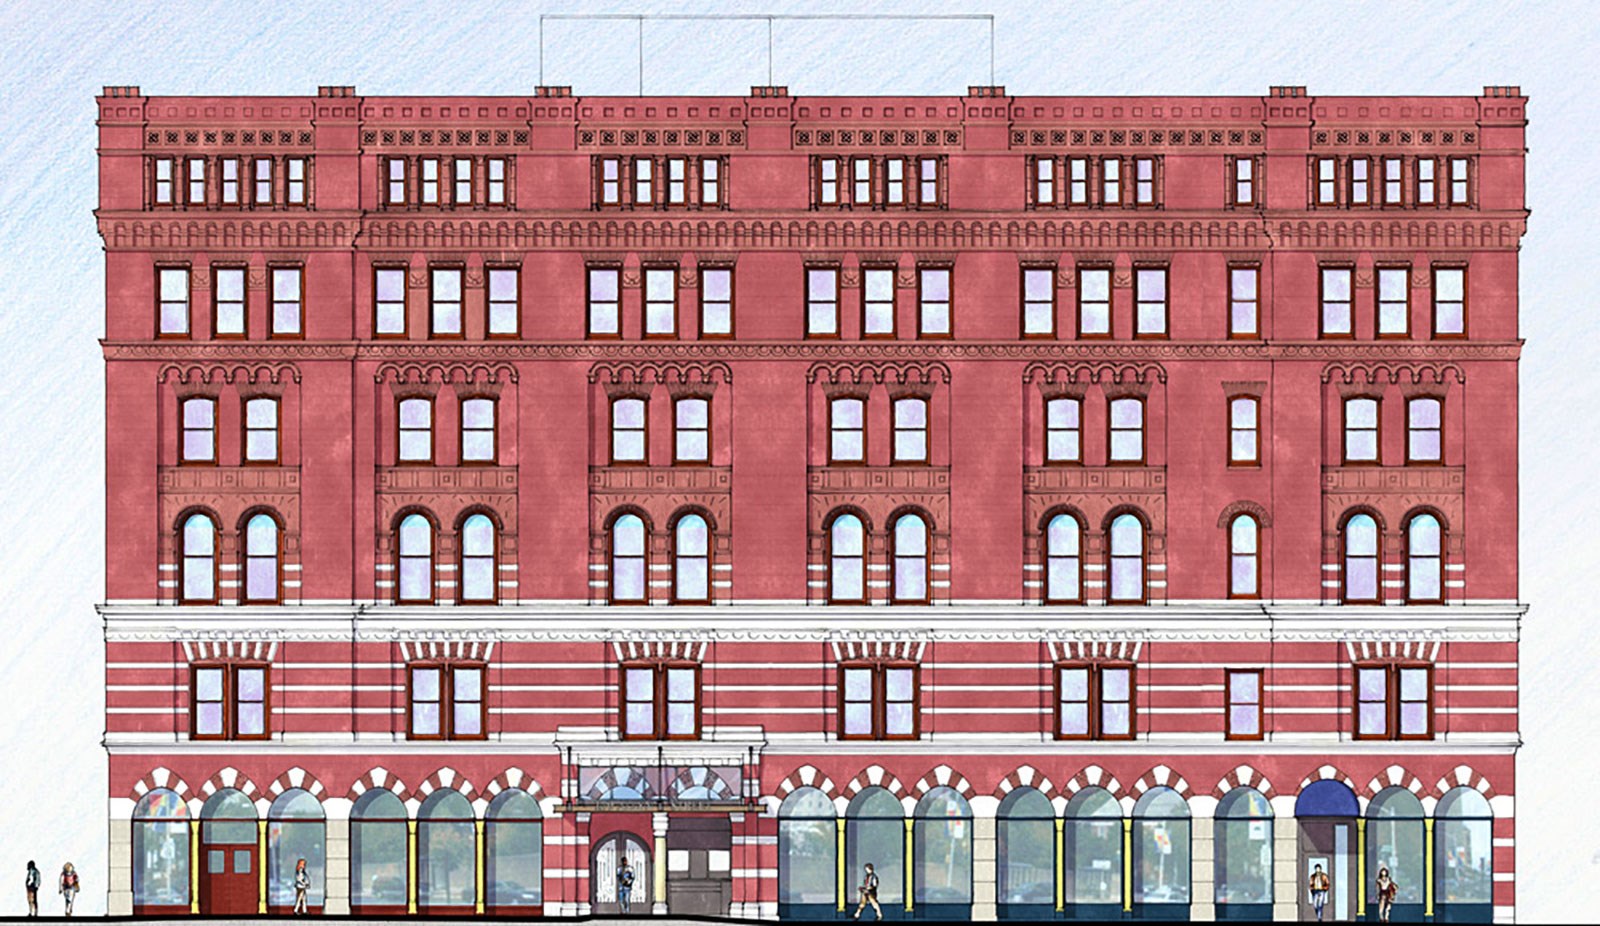 Architectural rendering of the building exterior.